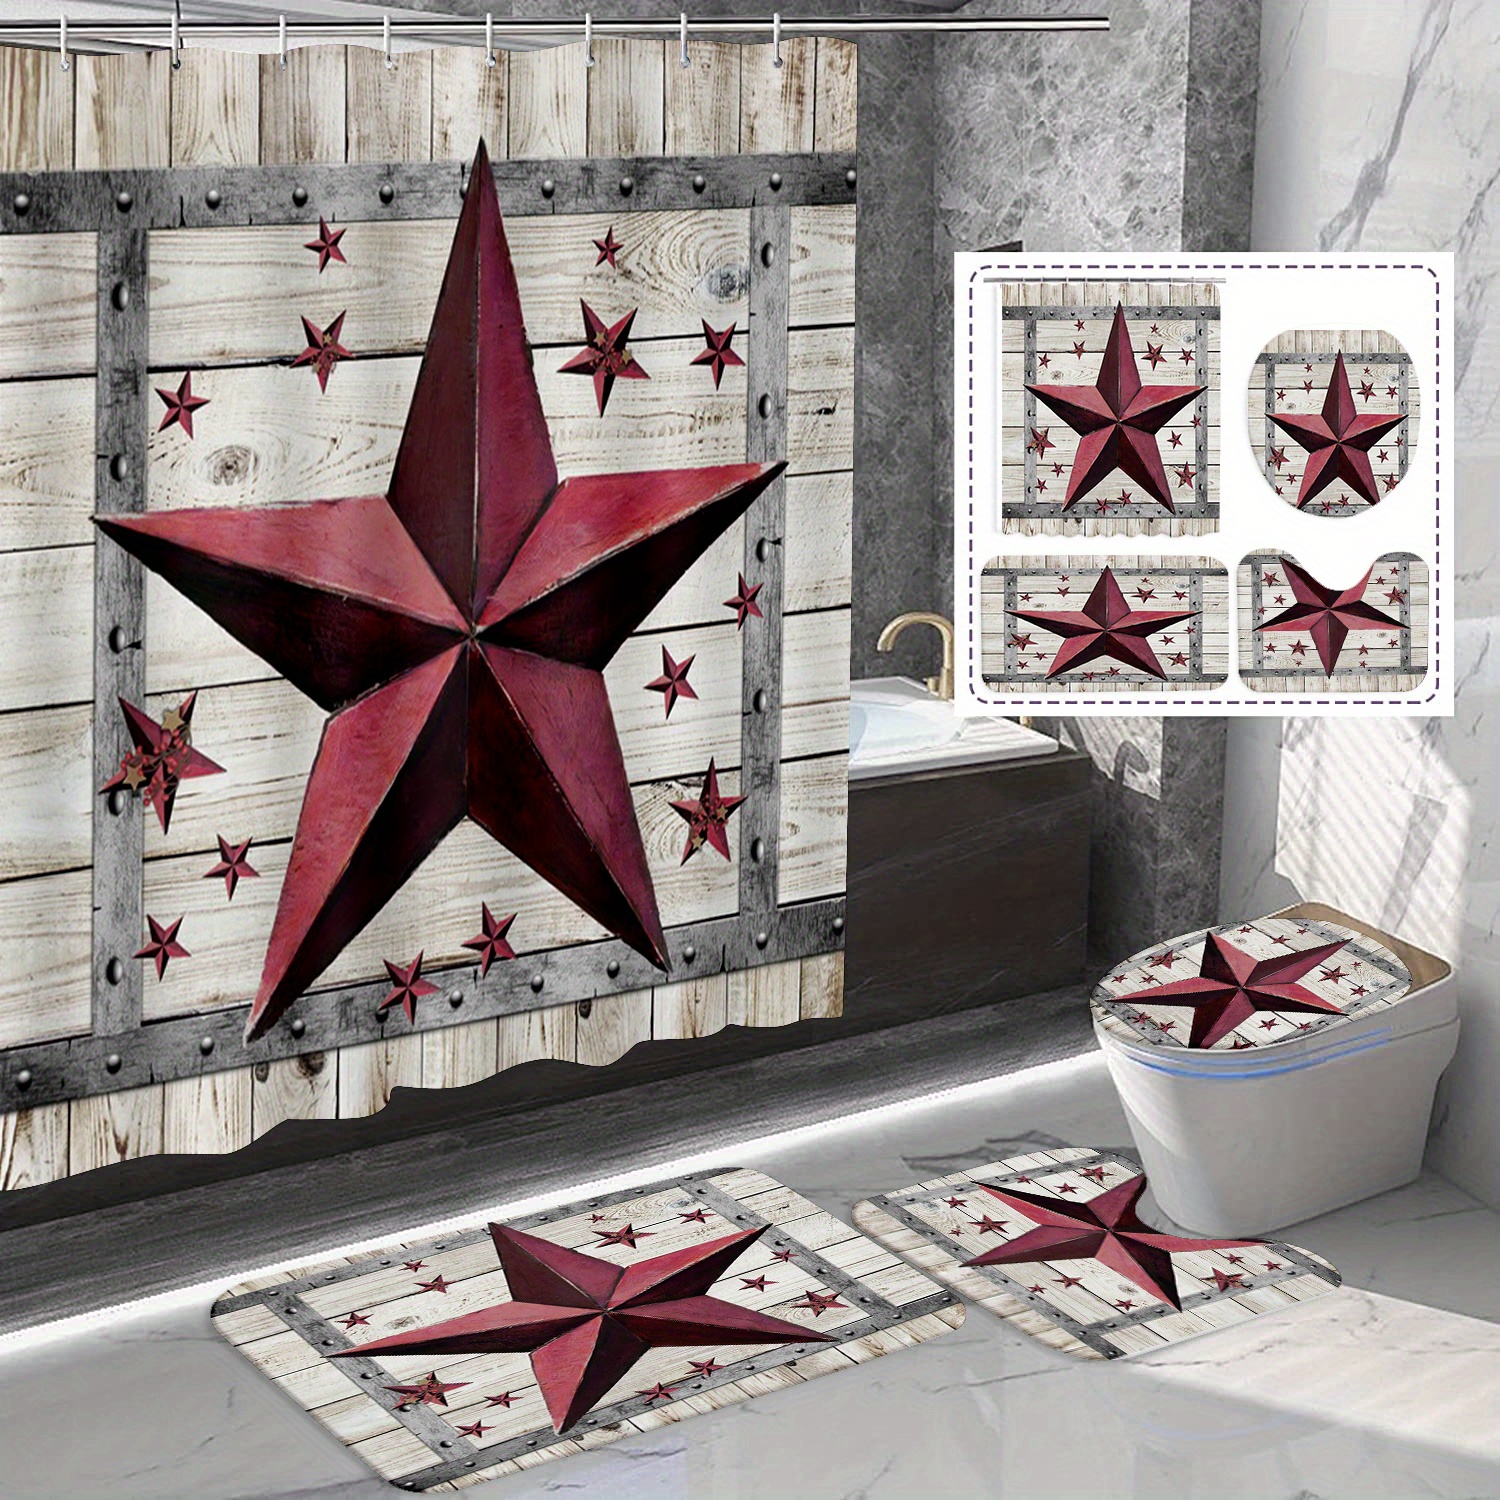 

Texas Star Rustic Farmhouse 4-piece Shower Curtain Set - Waterproof, Includes Bath Mat, U-shaped Rug & Toilet Lid Cover, Easy Install With Hooks, Machine Washable